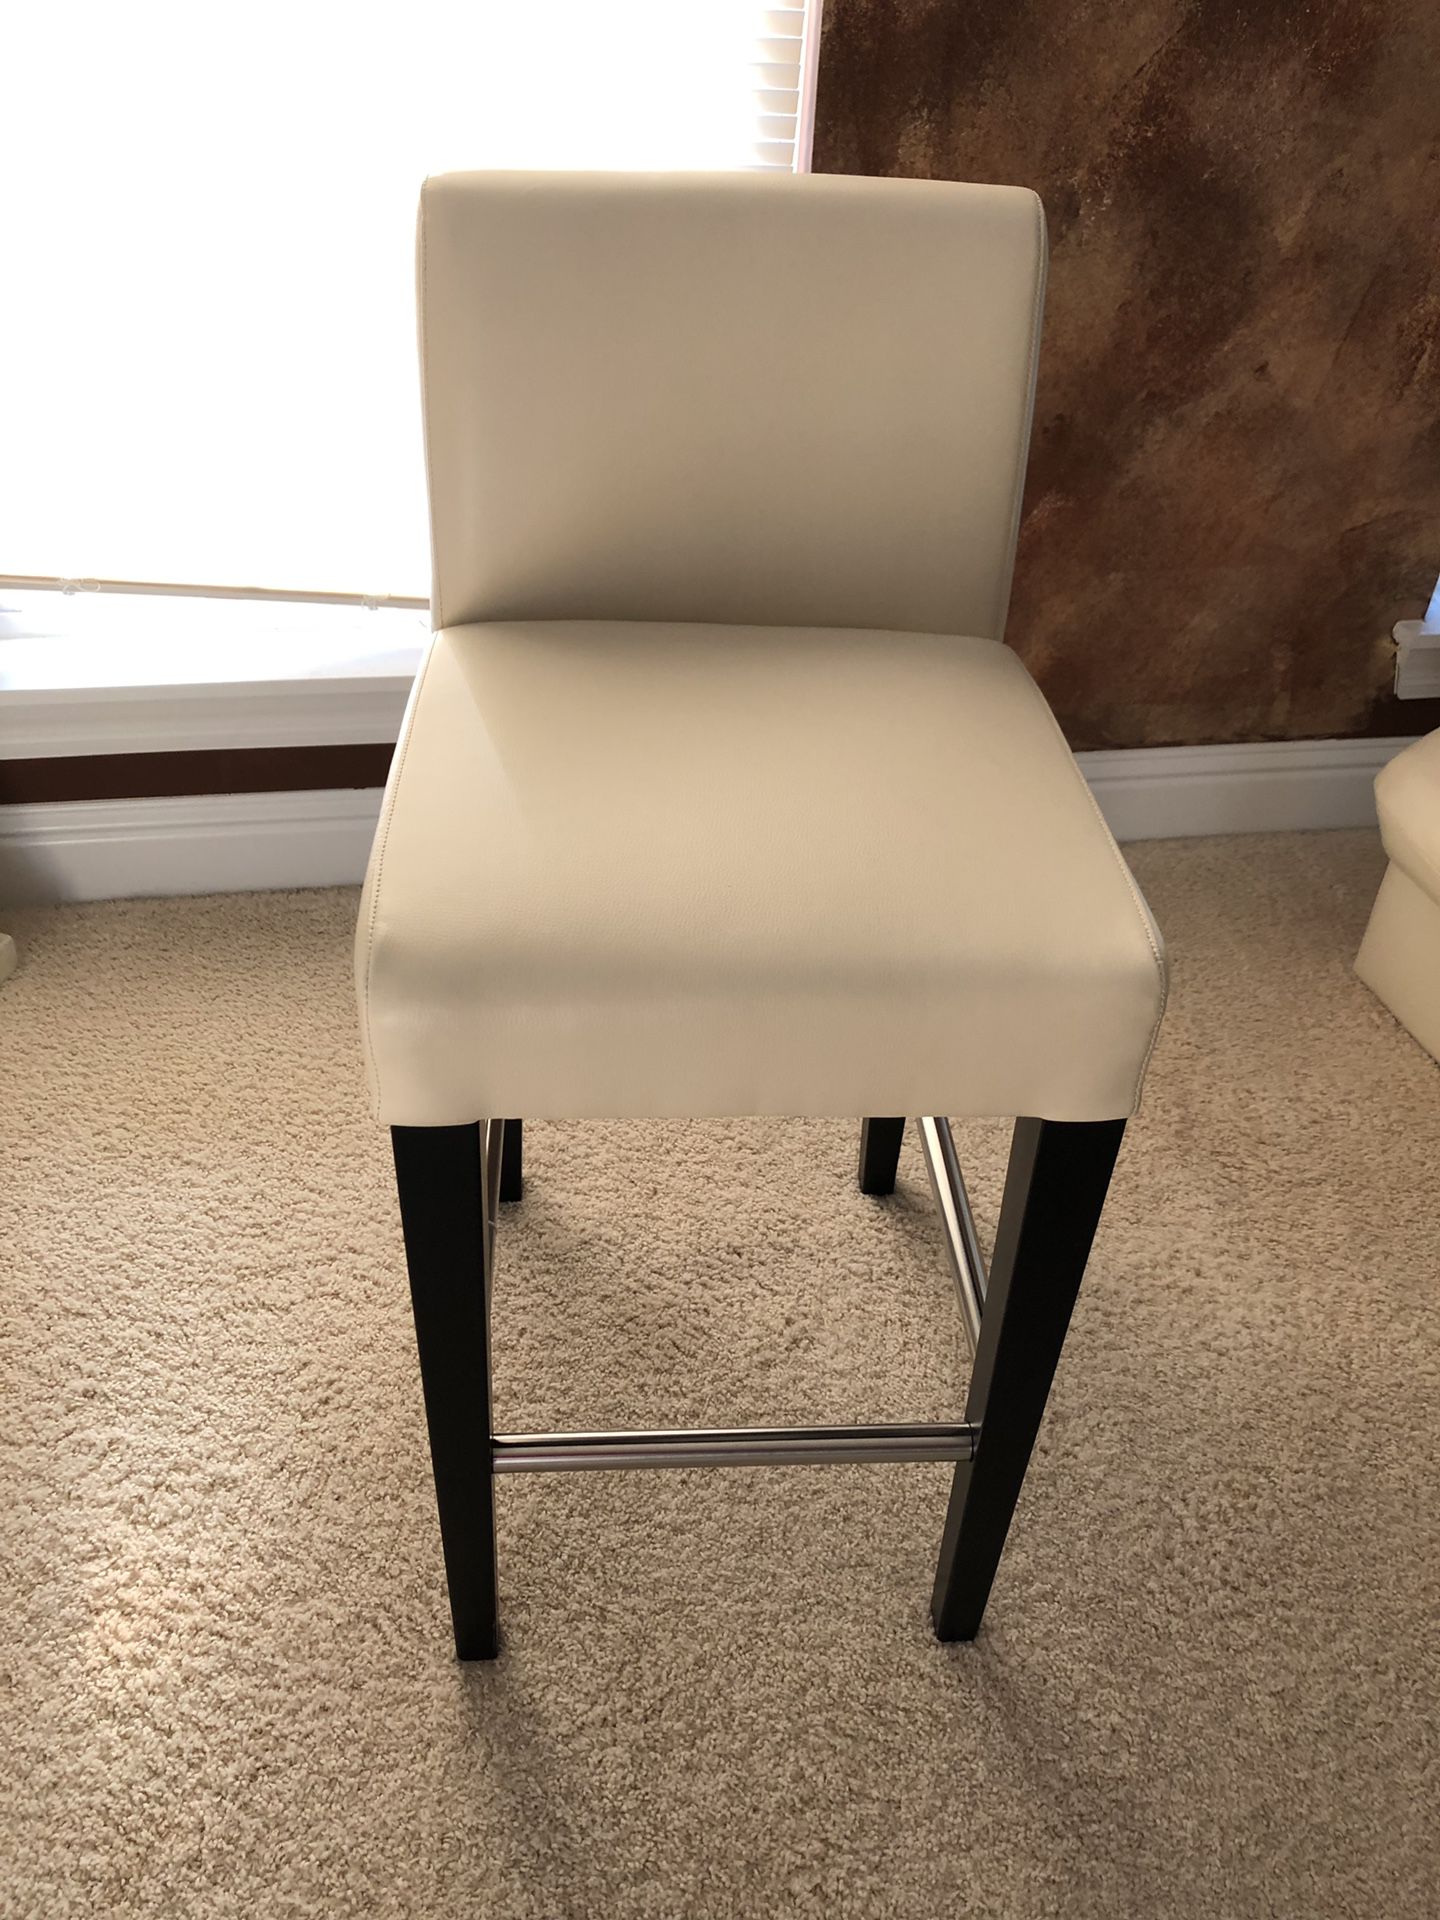 Cream colored leather chair/barstool